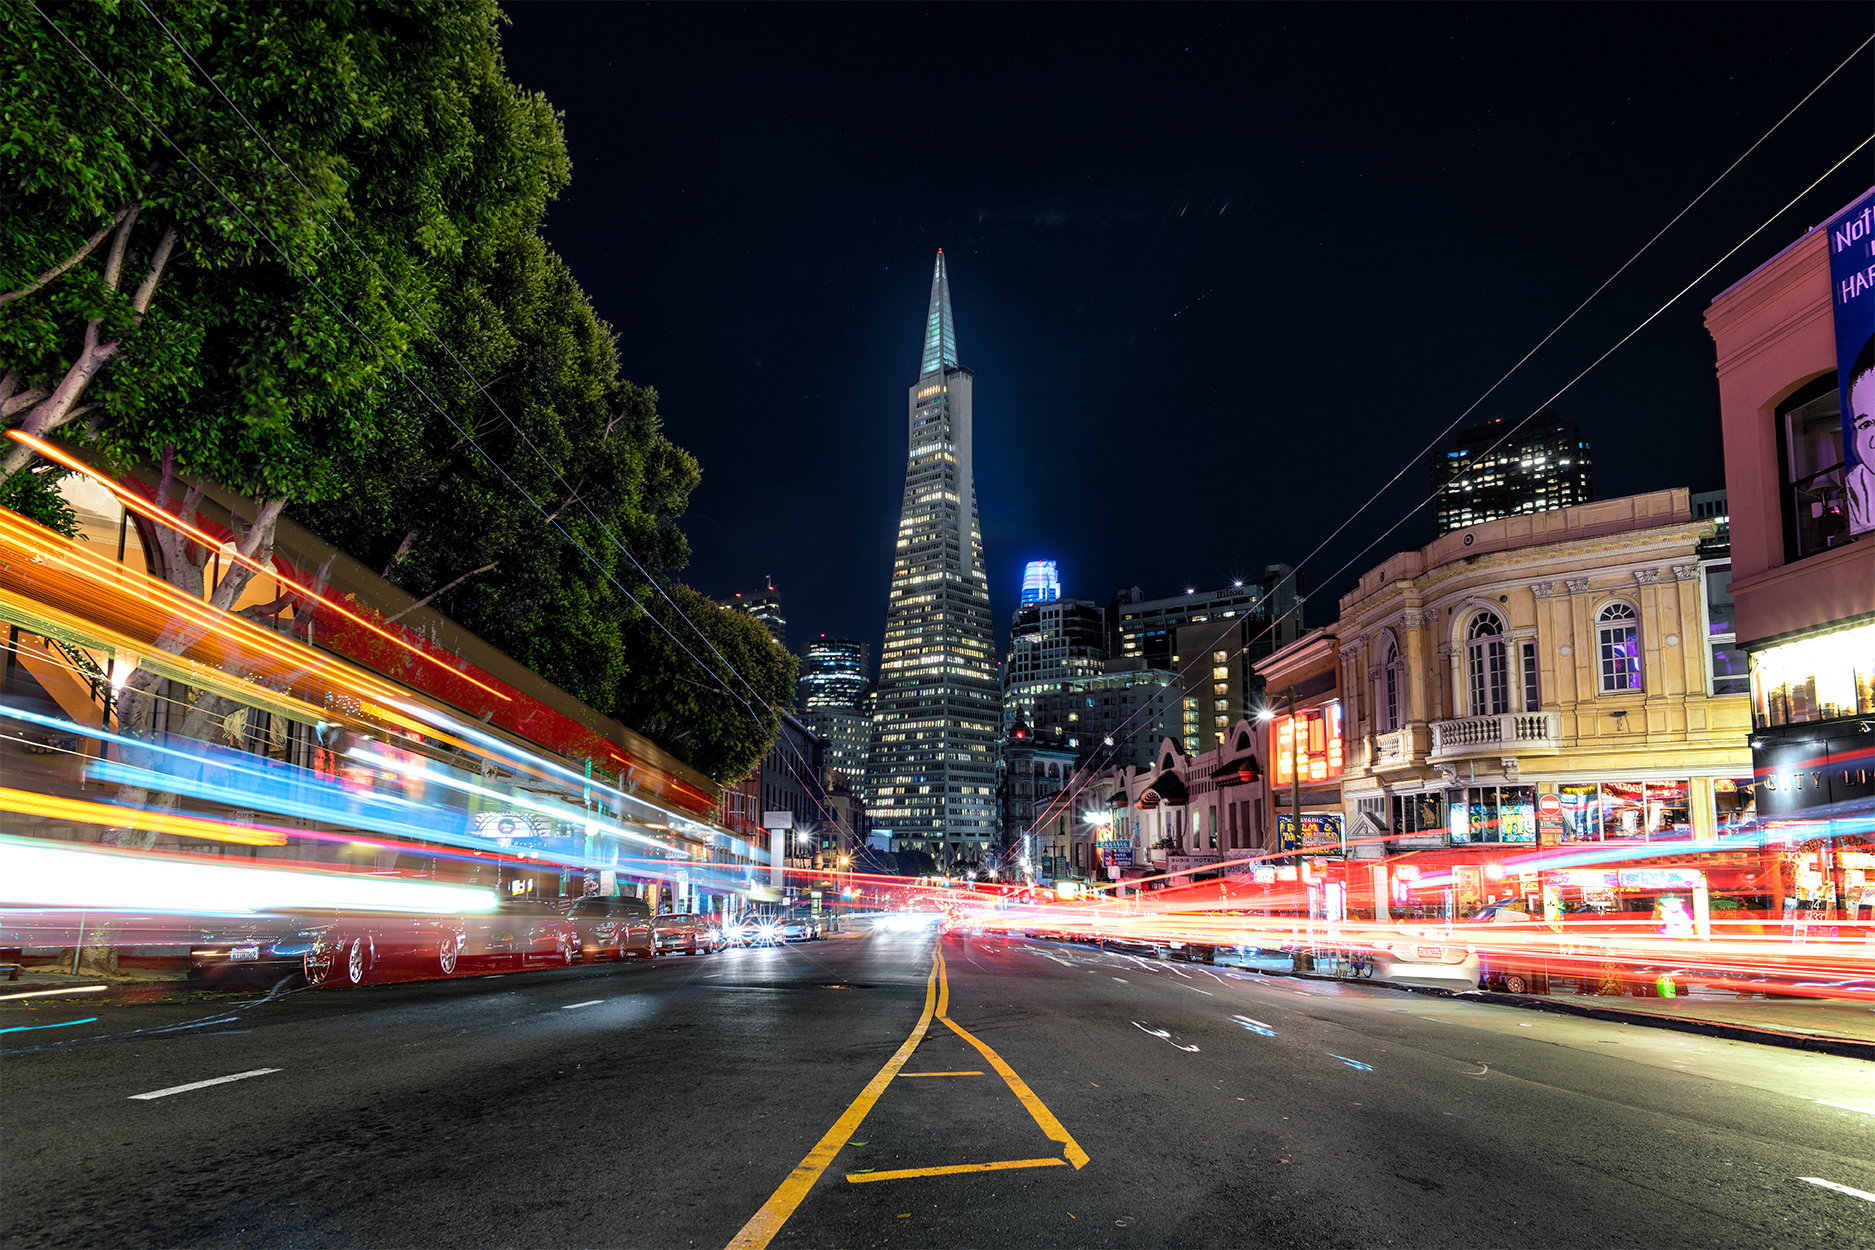 Long exposure light trails on either side, looking down the street toward the Transamerica Pyramid at night